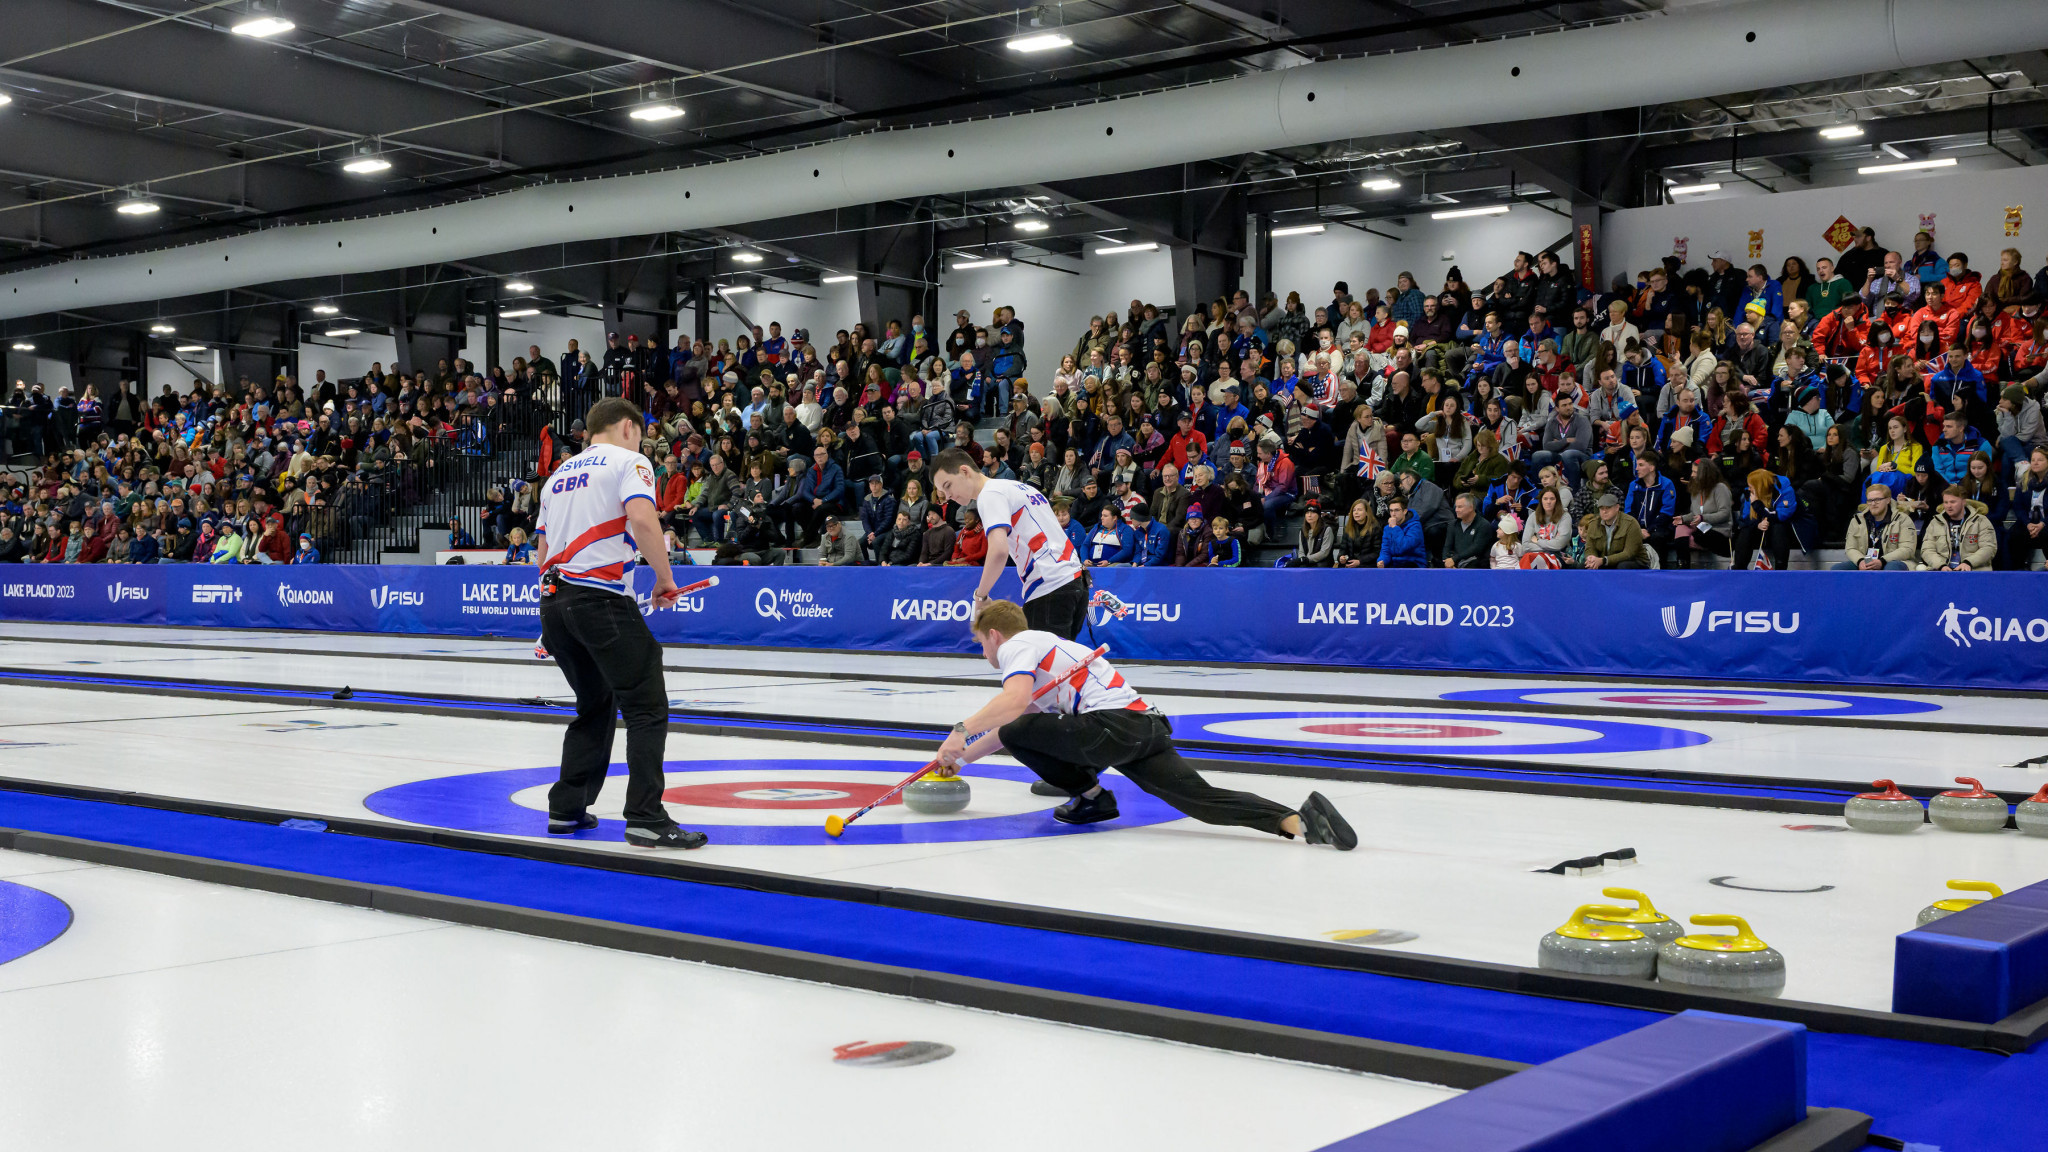 Britain became men's curling champions with an impressive victory over the US ©FISU